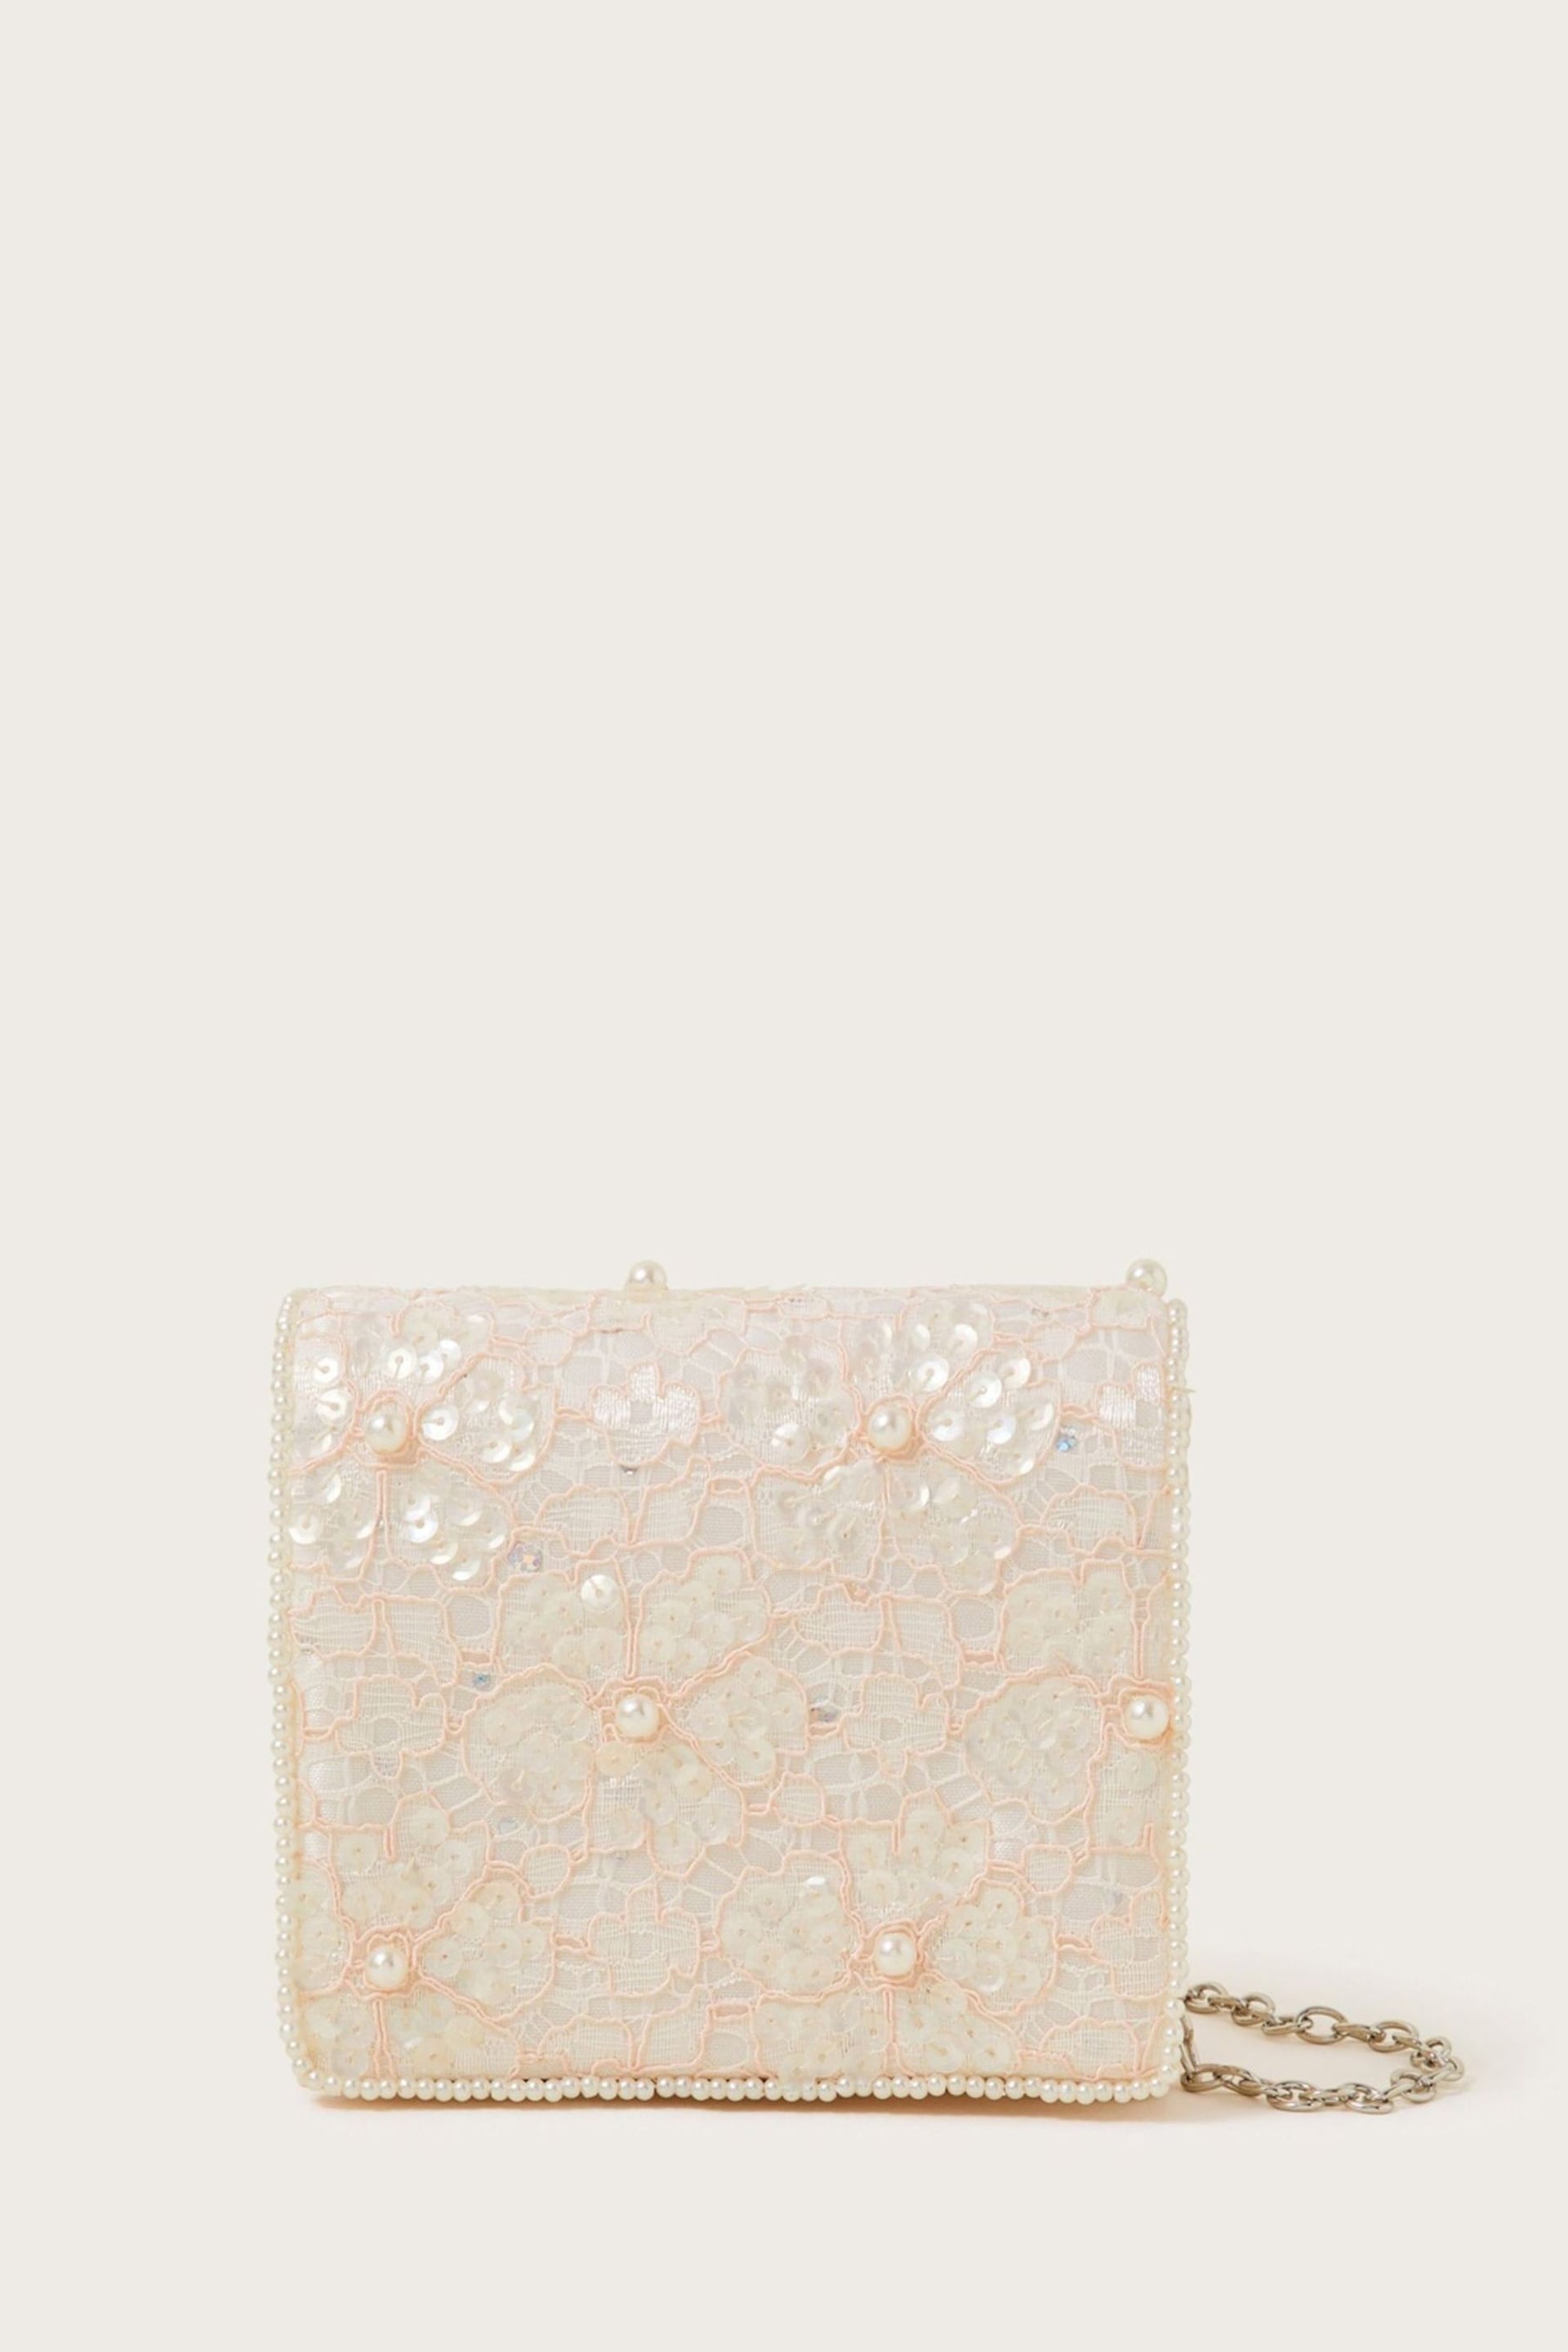 Monsoon Pink Pearly Lace Bag - Image 1 of 3